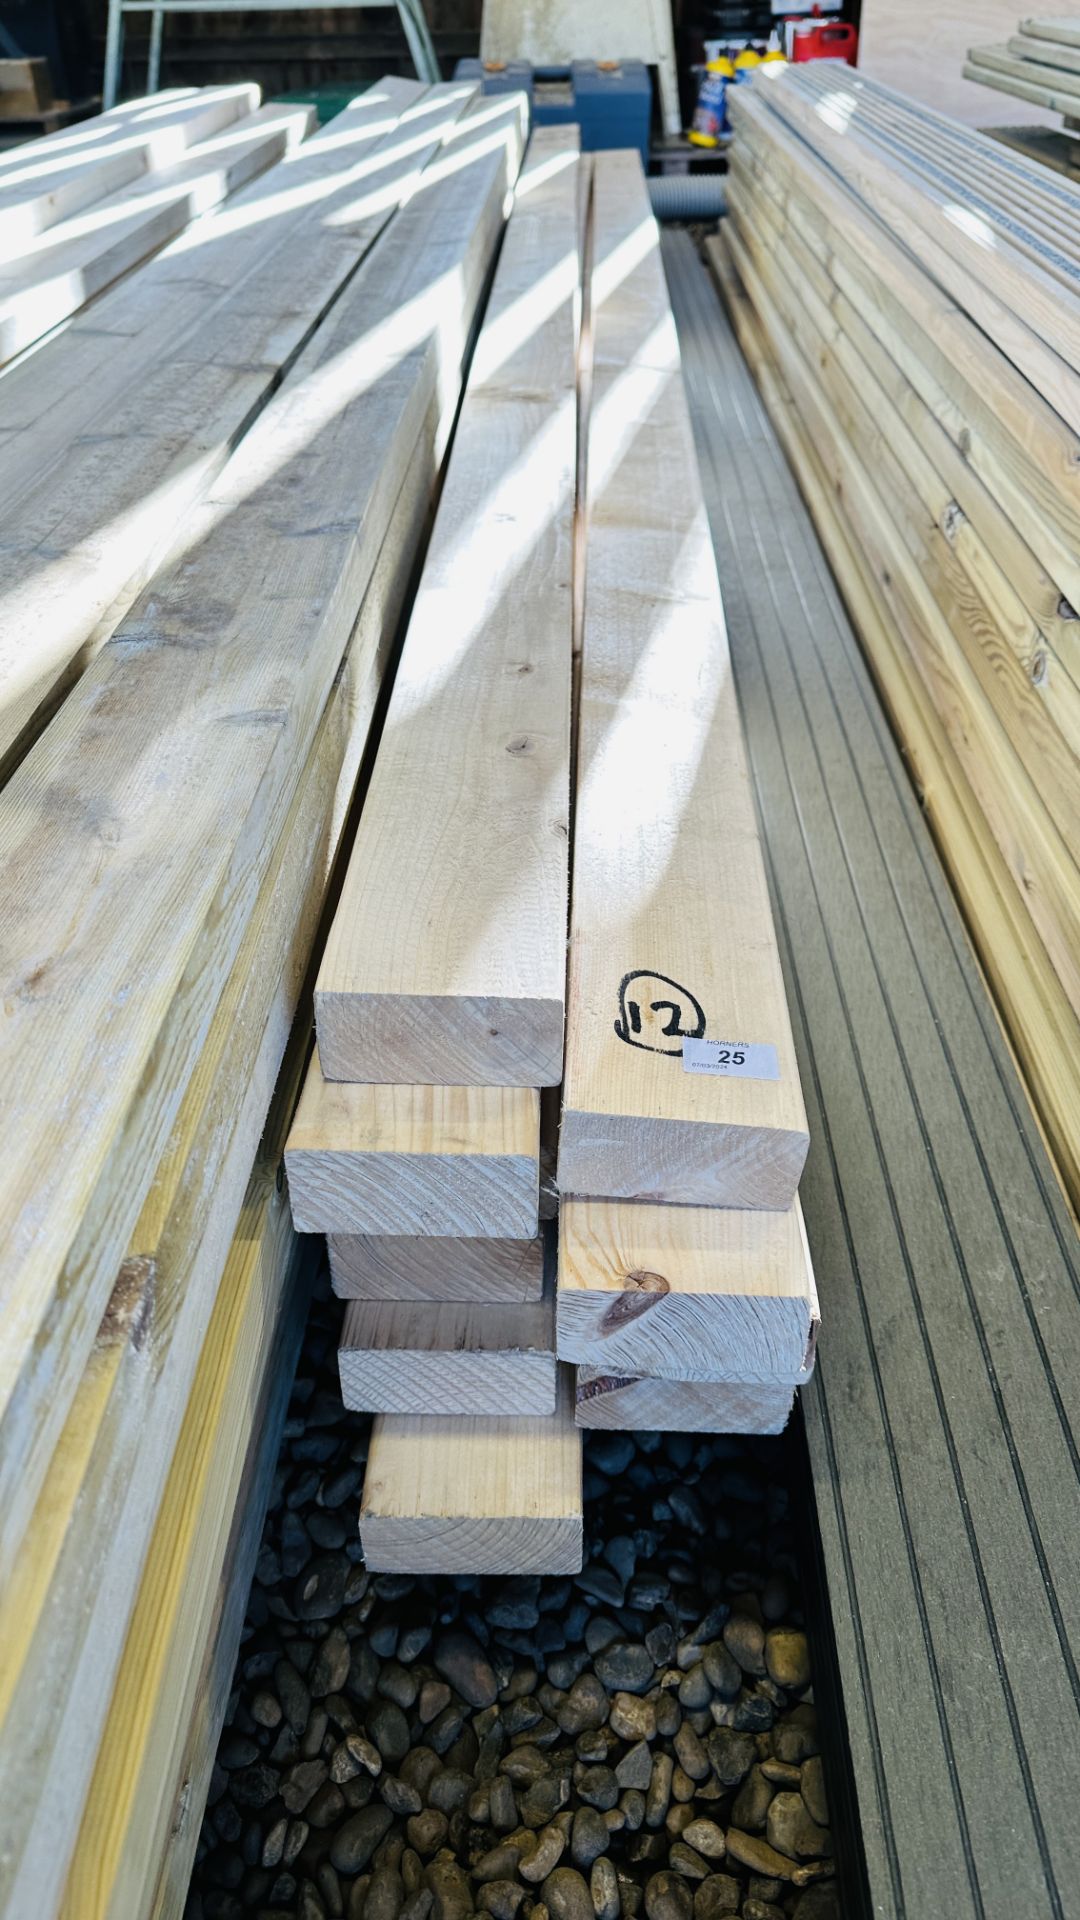 11 X 3 METRE LENGTHS 95MM X 45MM PLANED TIMBER. THIS LOT IS SUBJECT TO VAT ON HAMMER PRICE.